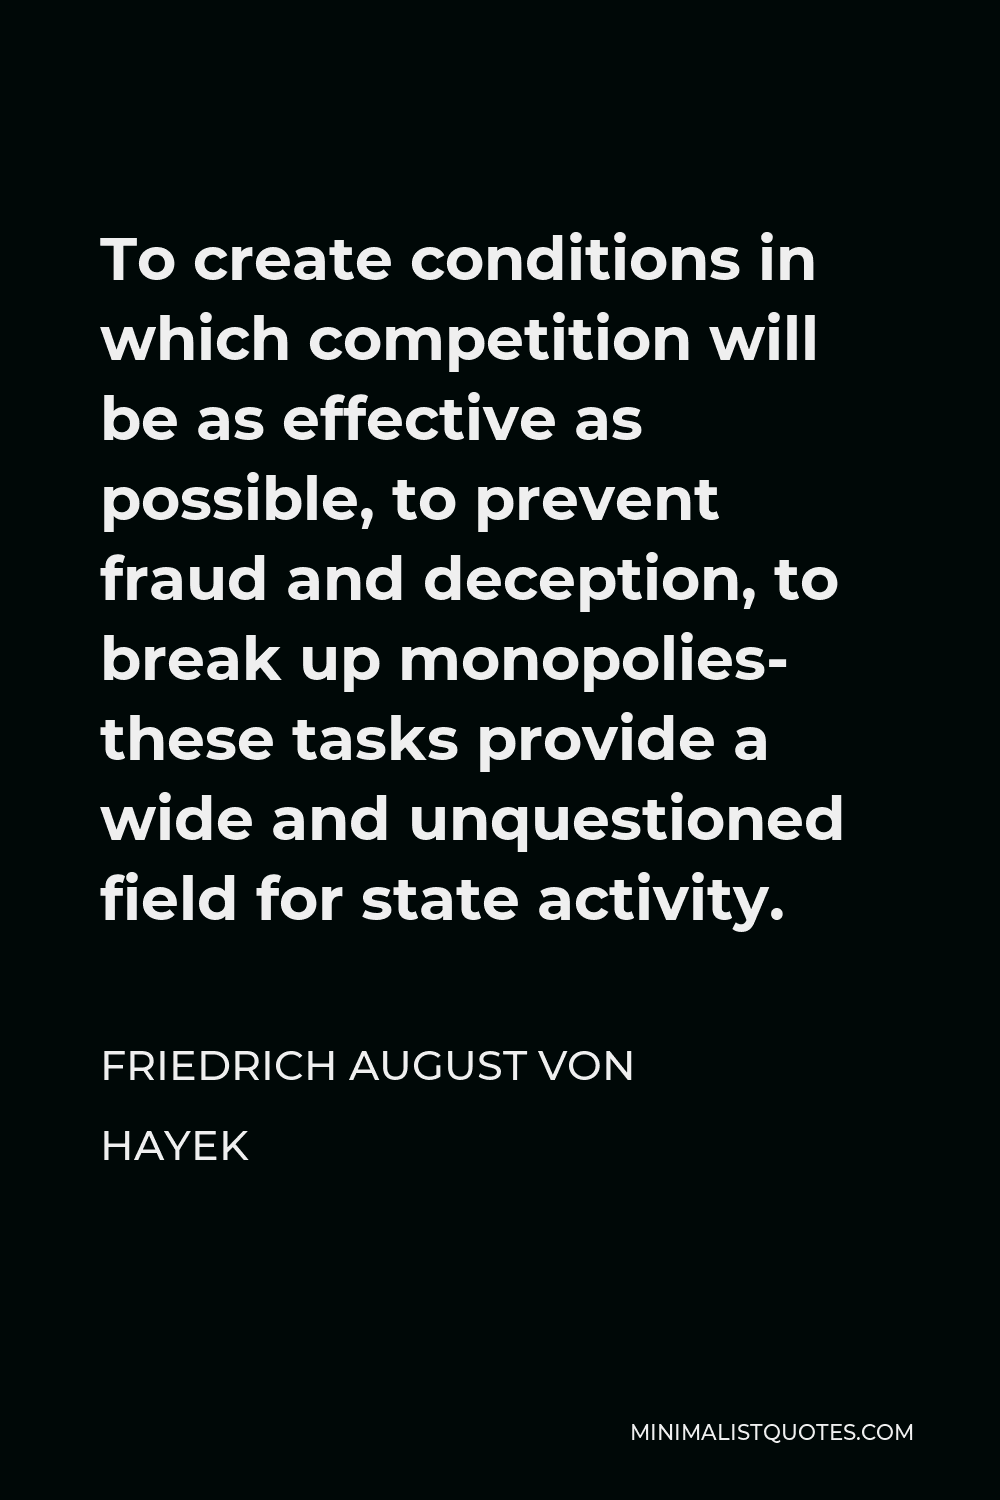 Friedrich August von Hayek Quote - To create conditions in which competition will be as effective as possible, to prevent fraud and deception, to break up monopolies- these tasks provide a wide and unquestioned field for state activity.